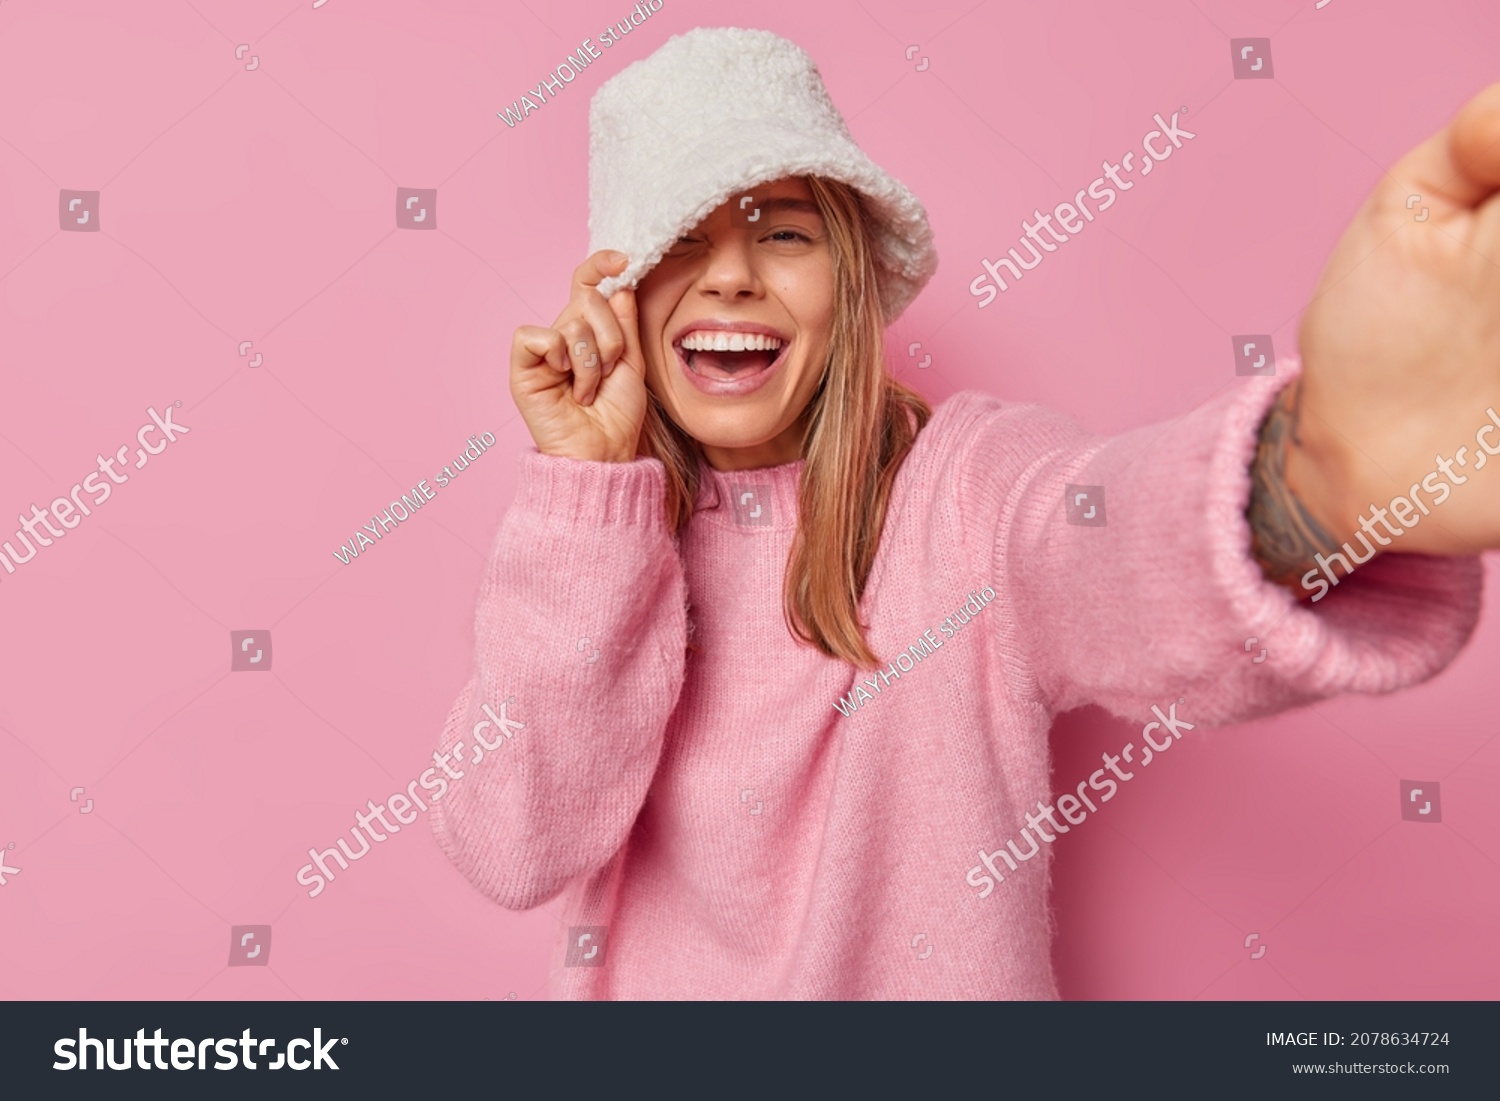 Cheerful optimistic woman wears white panama and jumper has positive playful expression poses for making selfie stretches arm forward camera isolated over pink background takes photo of herself #2078634724